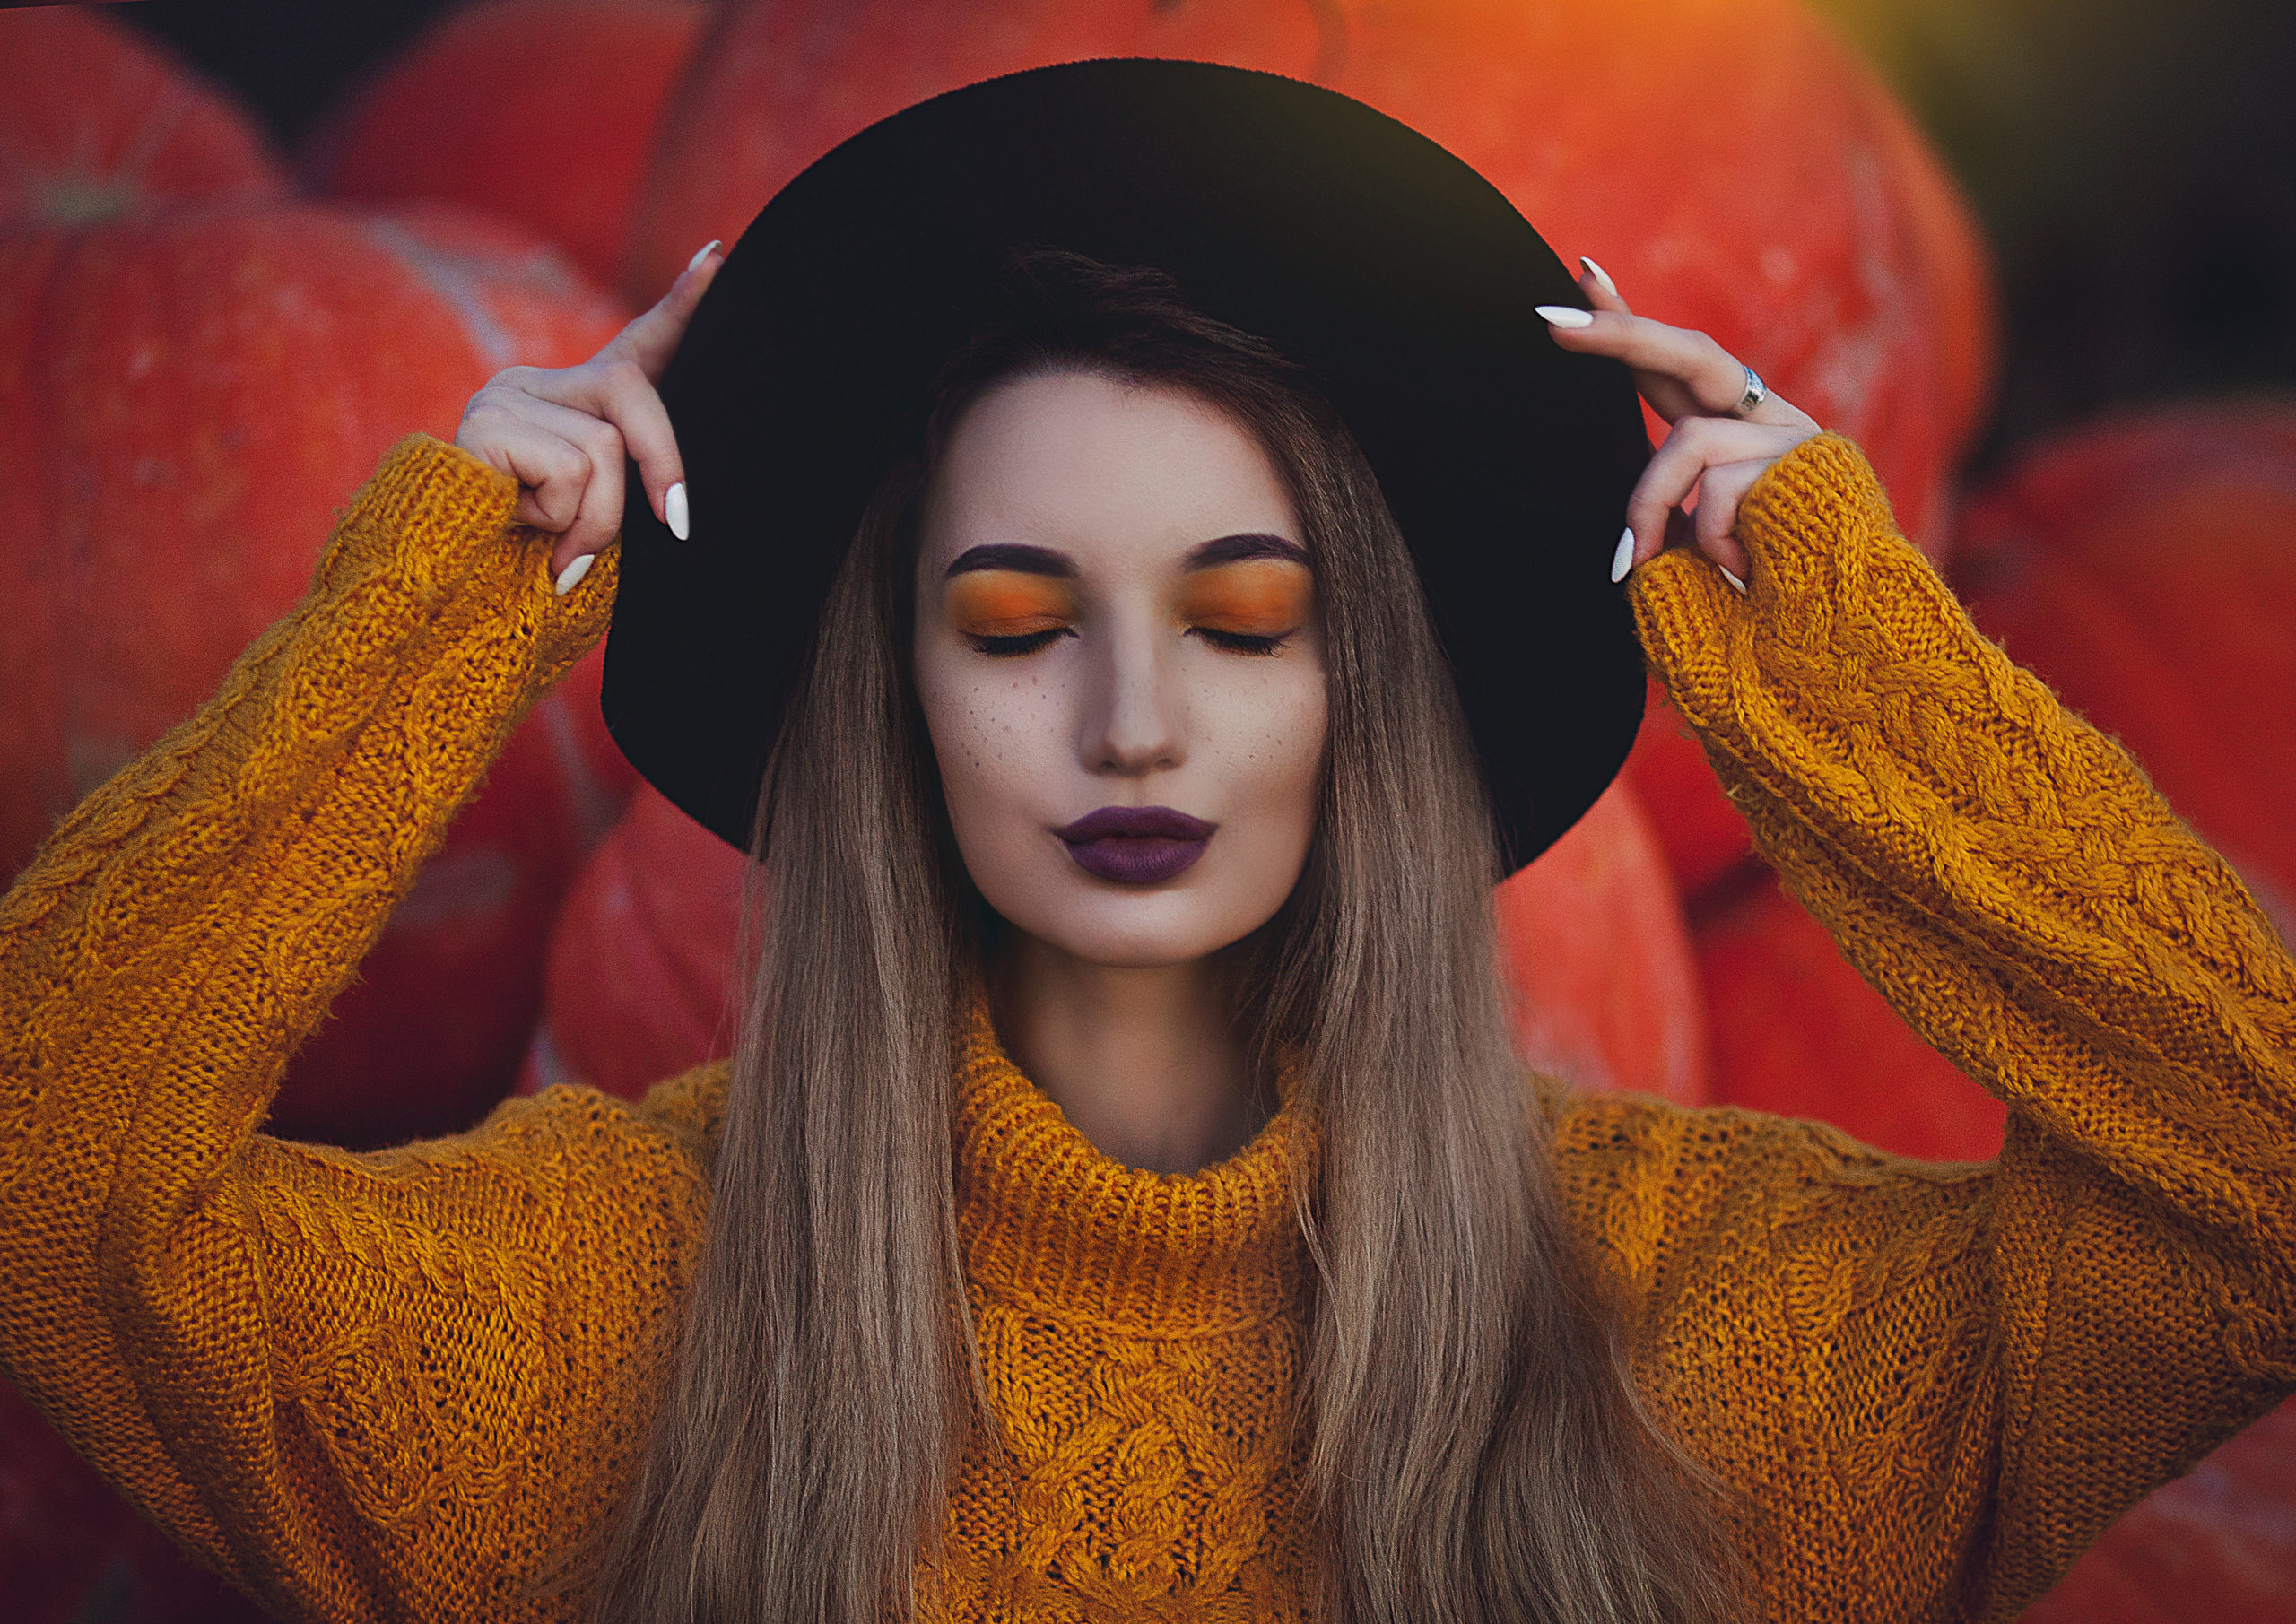 Teen girl getting made up for Halloween, with pumpkins in the background.